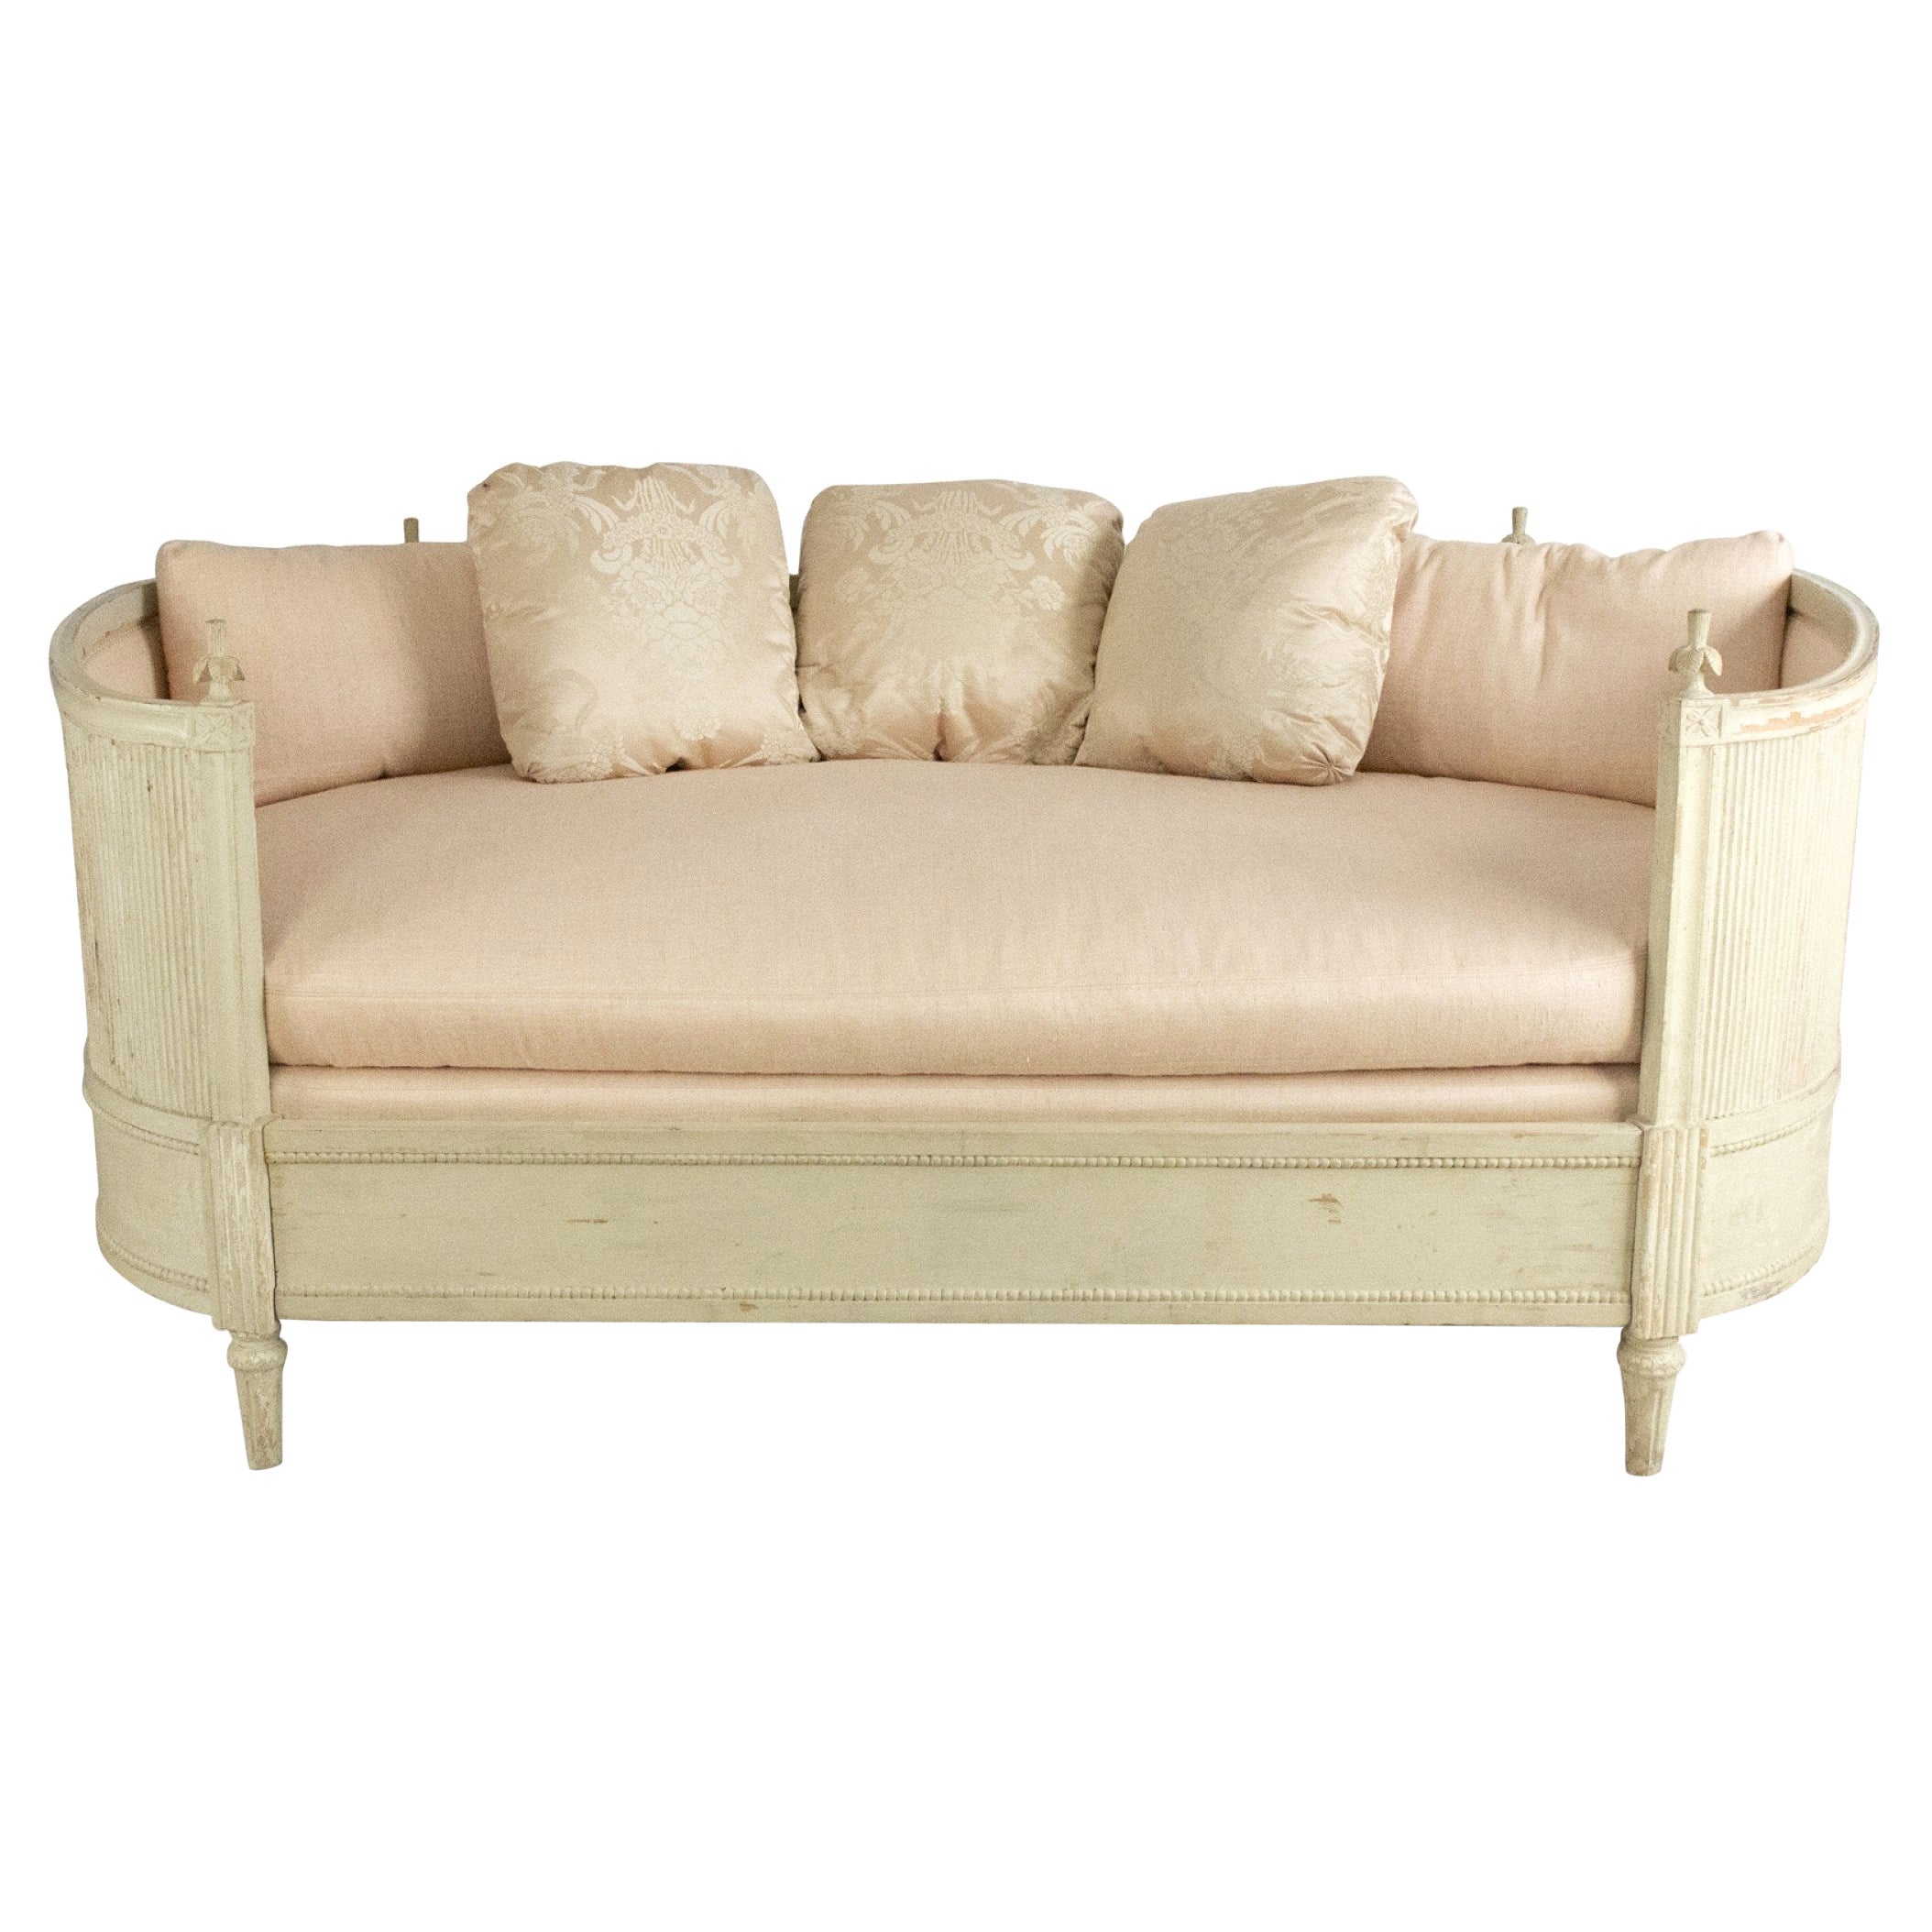 Louis XVI Style White Painted Wooden Daybed with Curved Back and Pink Upholstery For Sale